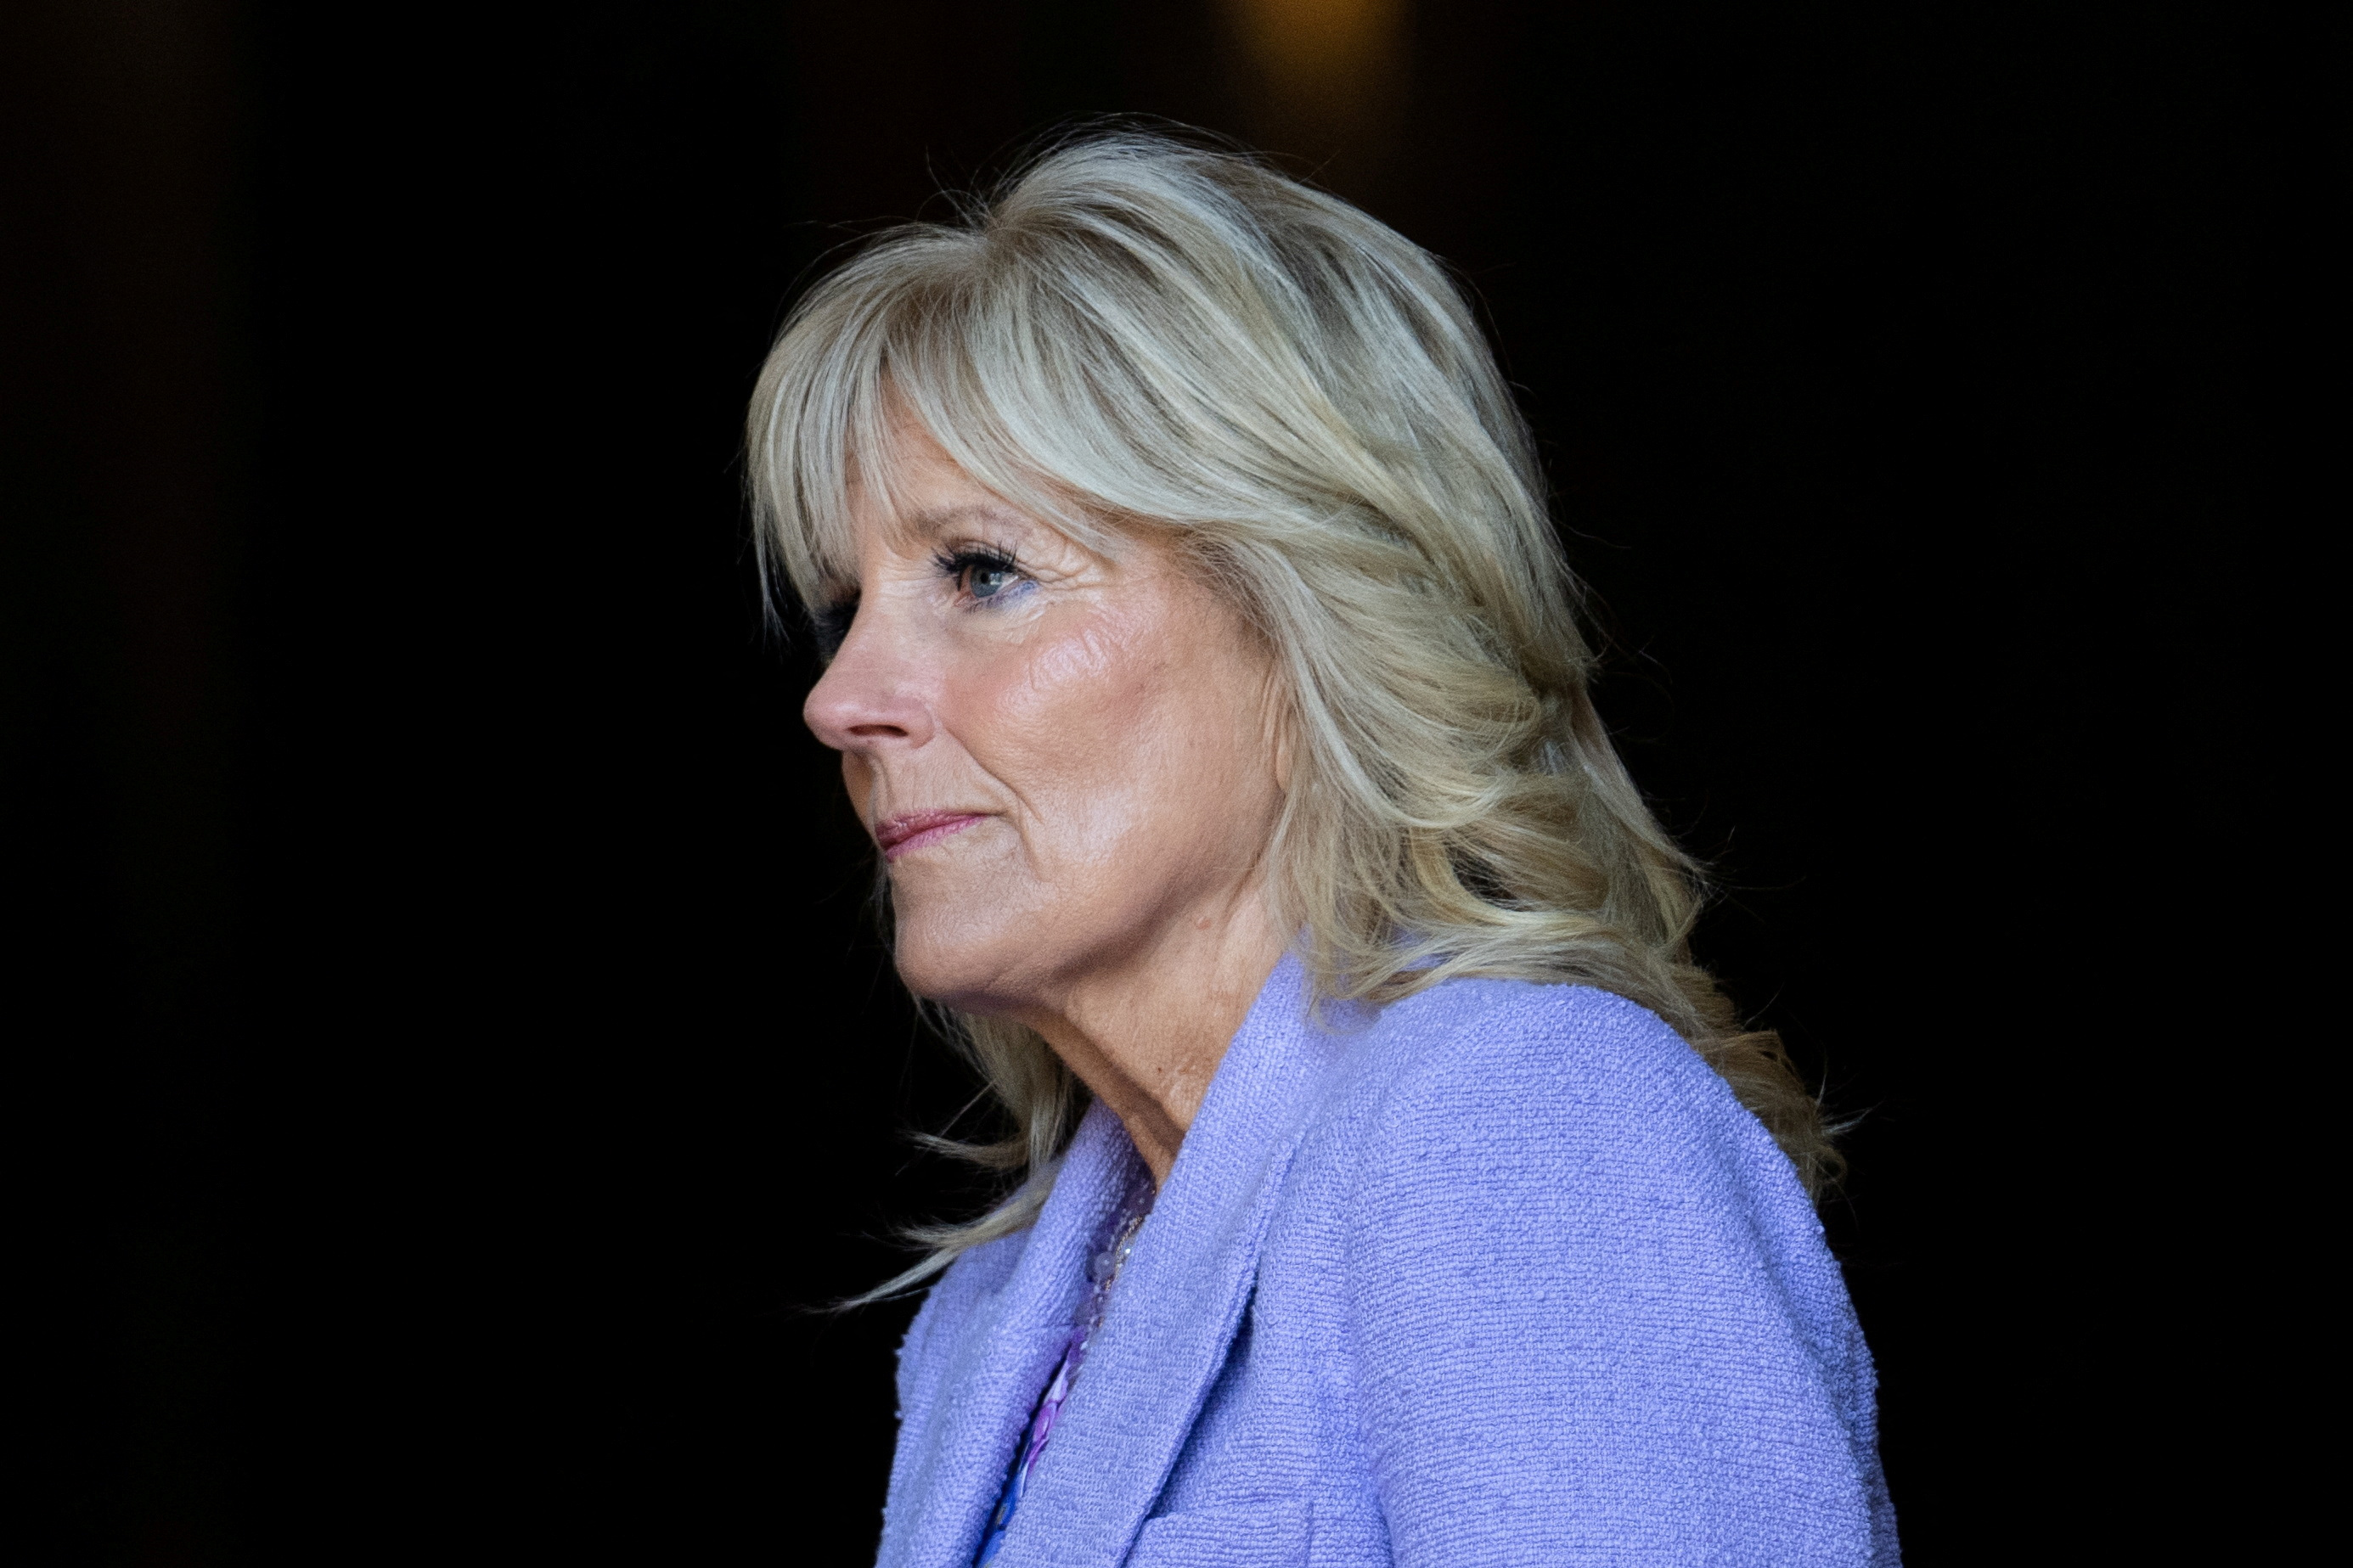 image U.S. first lady Jill Biden has surgery to remove skin lesion